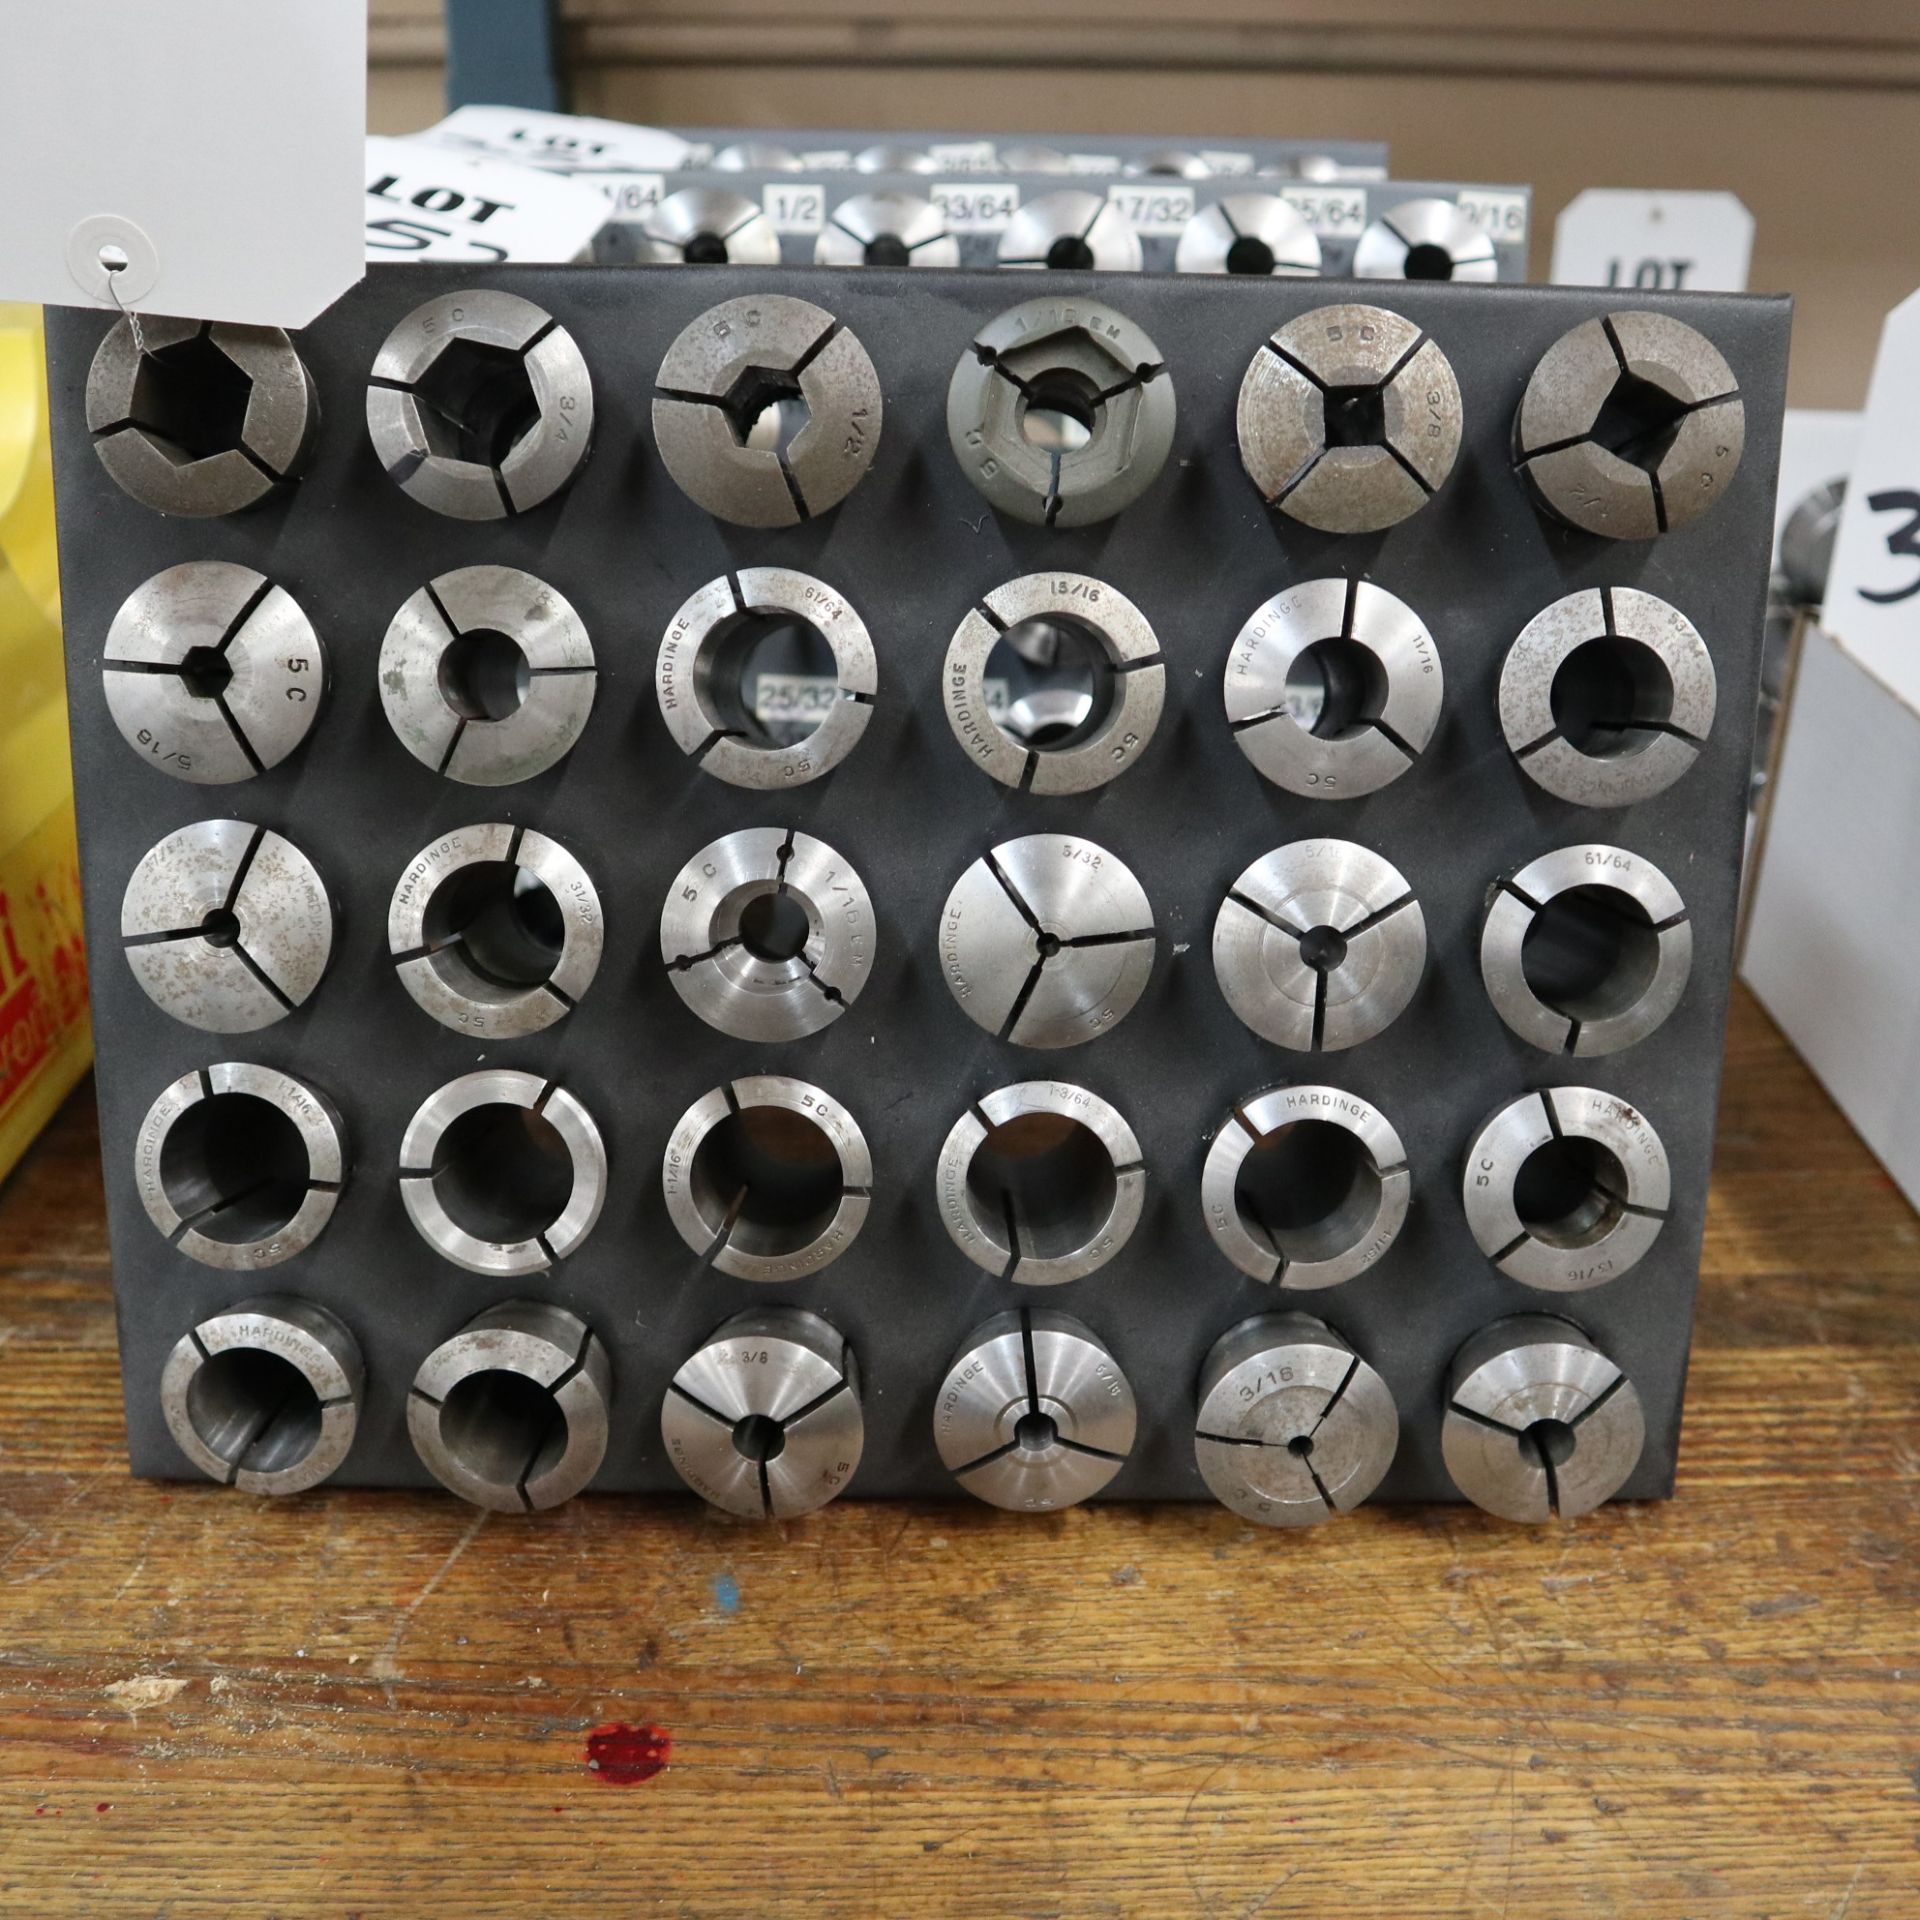 5C COLLET ORGANIZER TO INCLUDE MISC. 5C COLLETS - Image 3 of 3